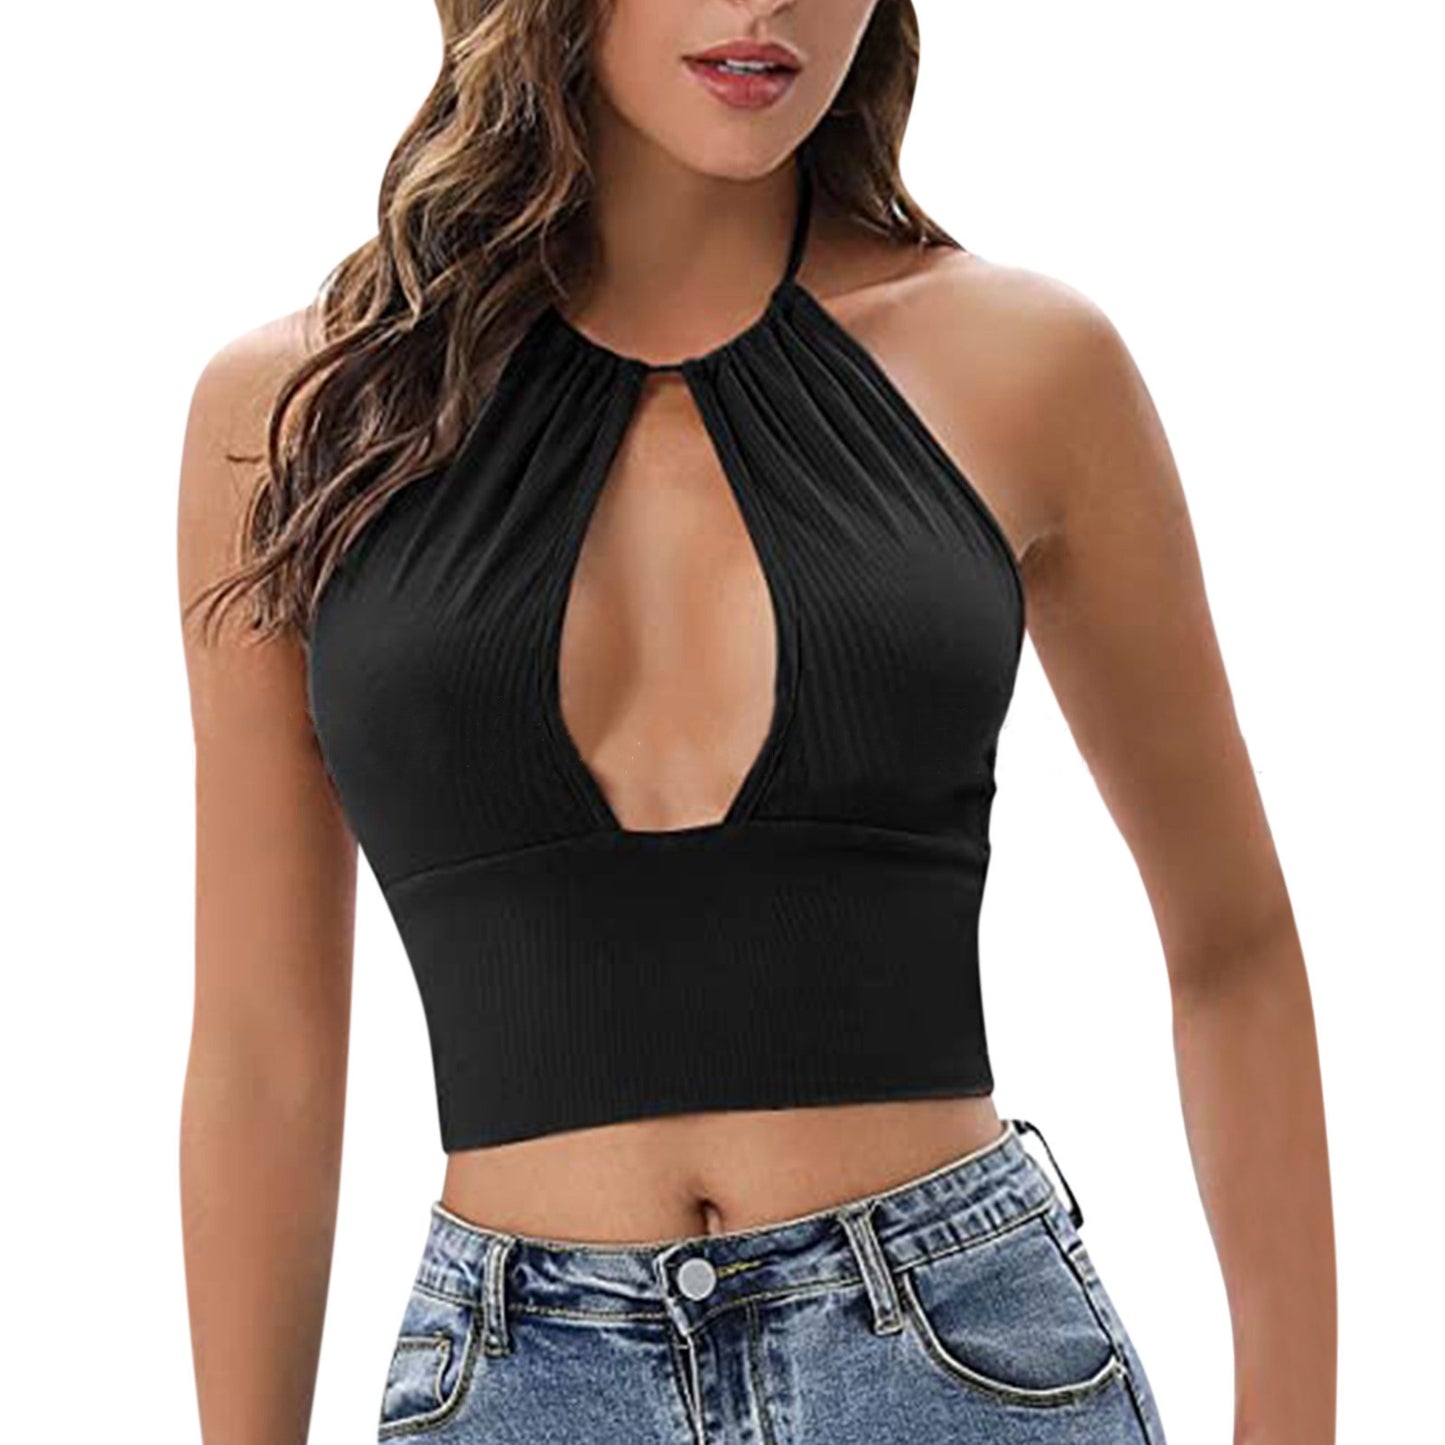 Camisole Halter Vest Women Summer Sexy Hollow Tops - Classic chic